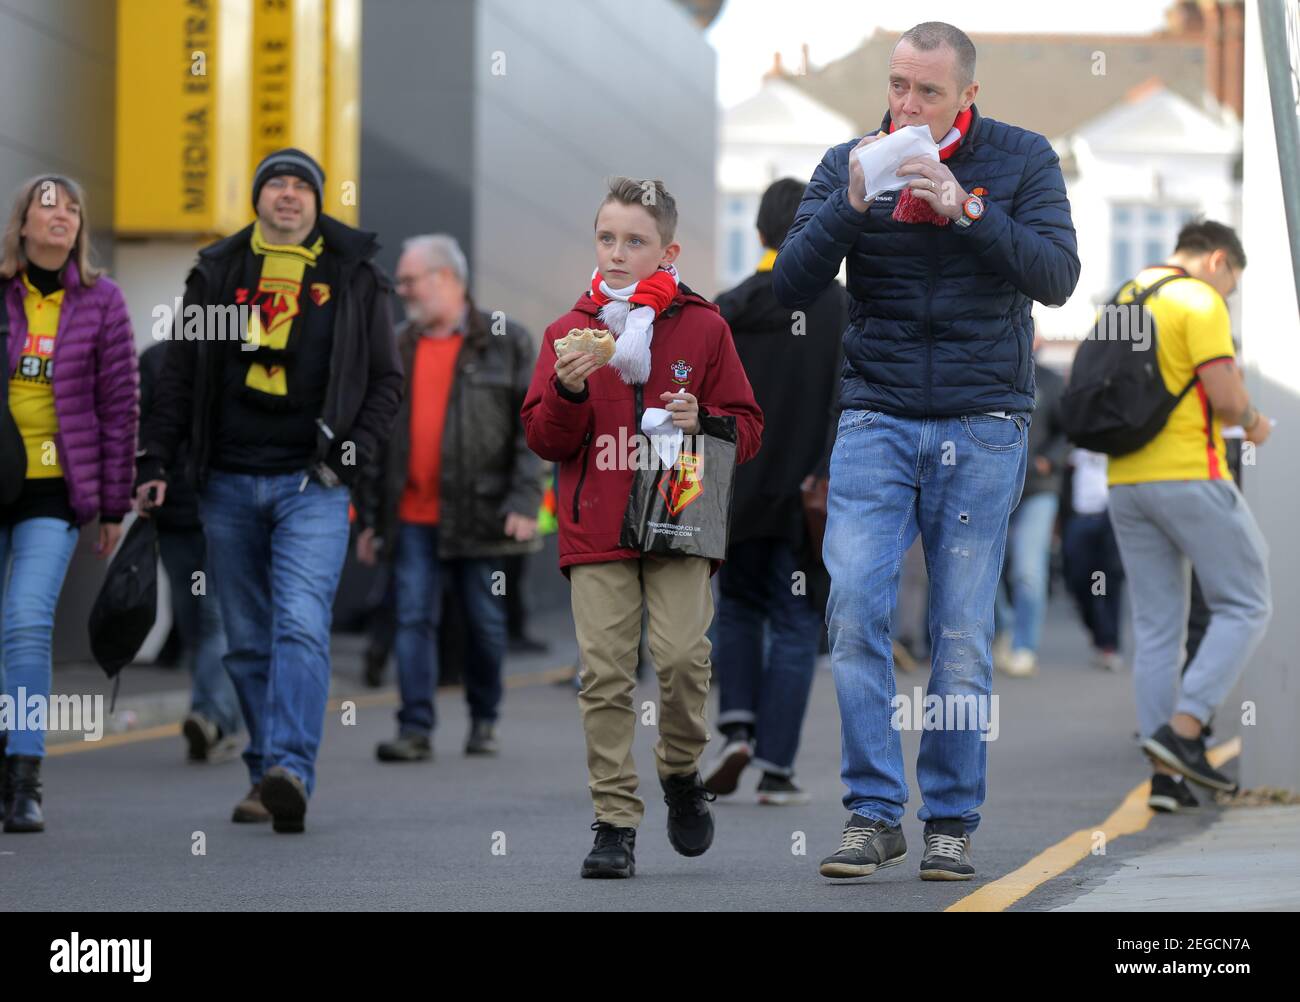 Britain Soccer Football - Watford v Southampton - Premier League - Vicarage Road - 4/3/17 Watford fans outside the stadium before the game Reuters / Paul Hackett Livepic EDITORIAL USE ONLY. No use with unauthorized audio, video, data, fixture lists, club/league logos or 'live' services. Online in-match use limited to 45 images, no video emulation. No use in betting, games or single club/league/player publications.  Please contact your account representative for further details. Stock Photo